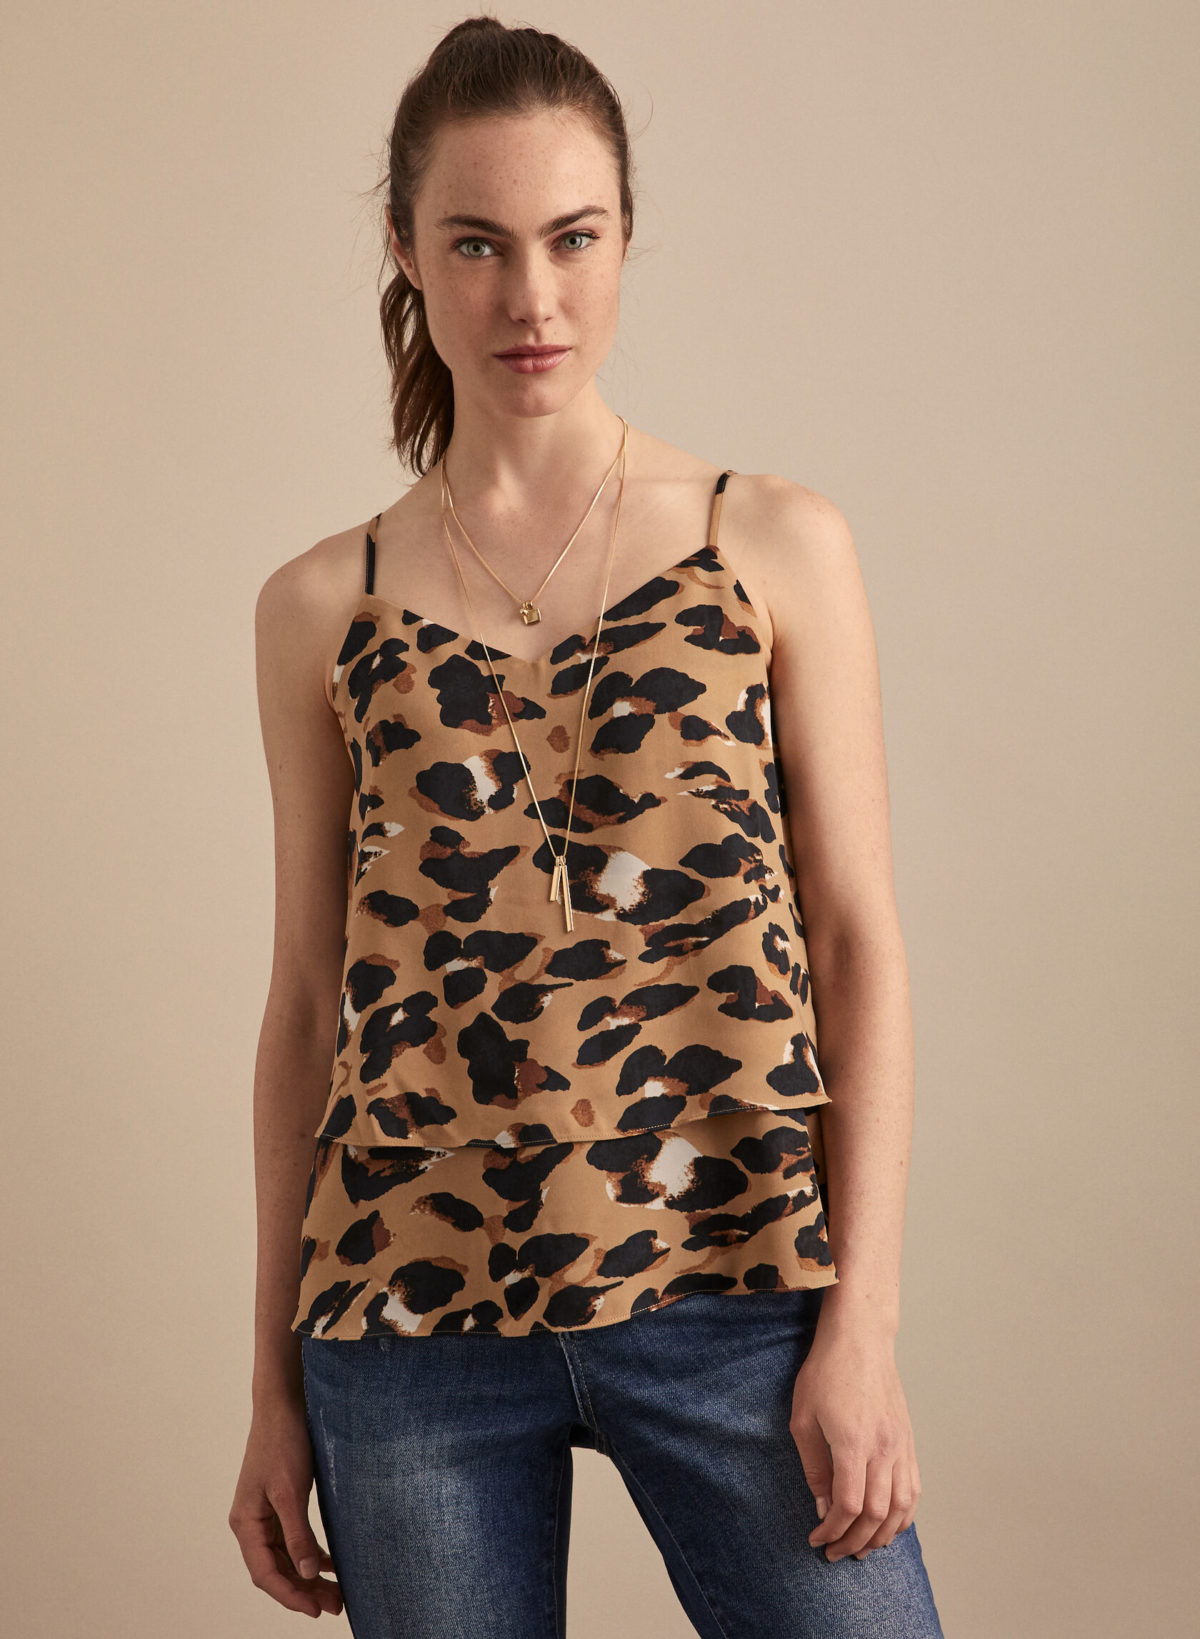 A woman wearing a leopard print camisole.